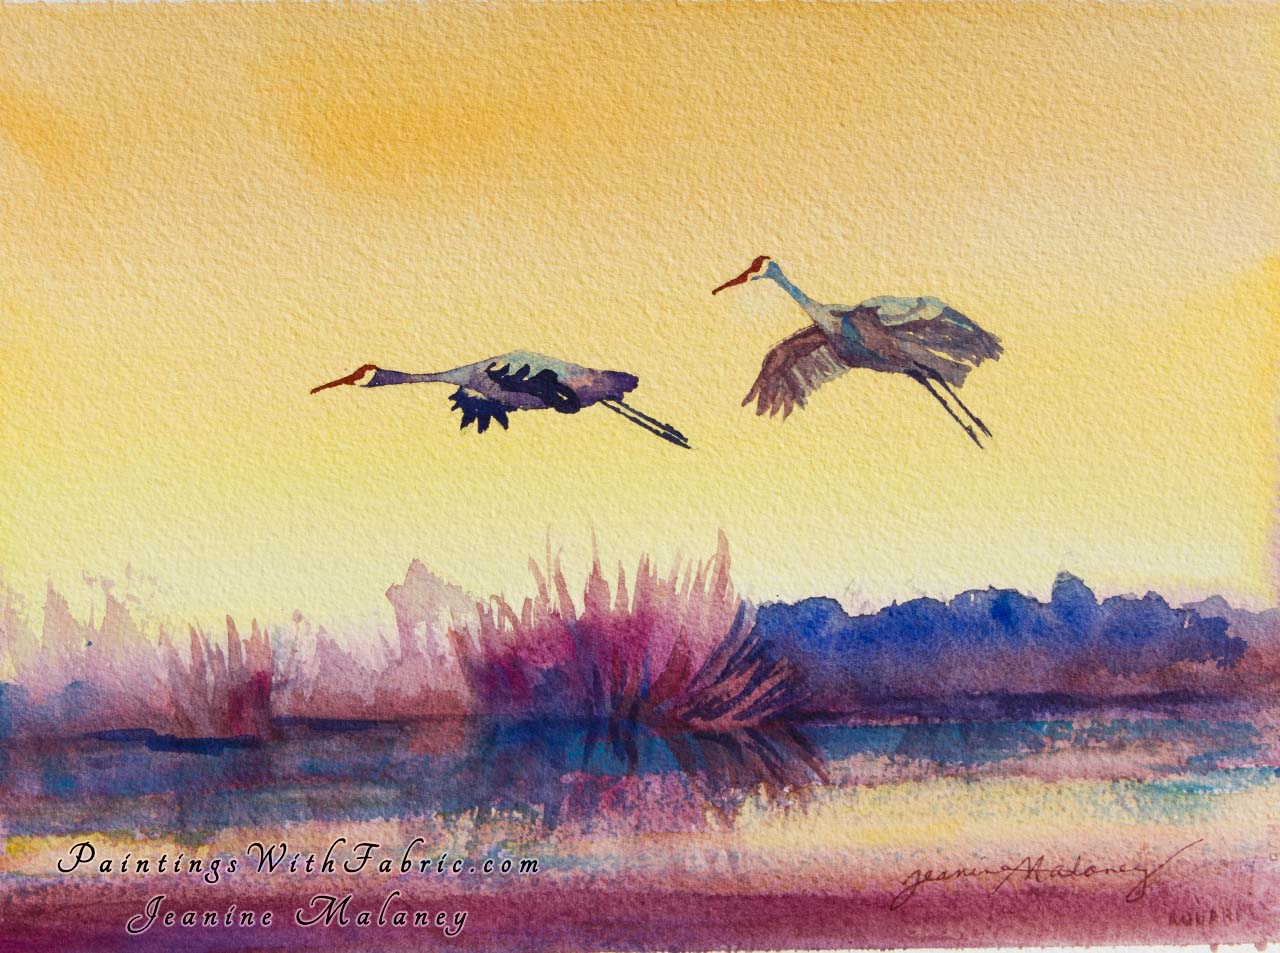 Sunset Landing  Unframed Original Watercolor Painting two Sandhill Cranes at Bosque del Apache coming in for a landing